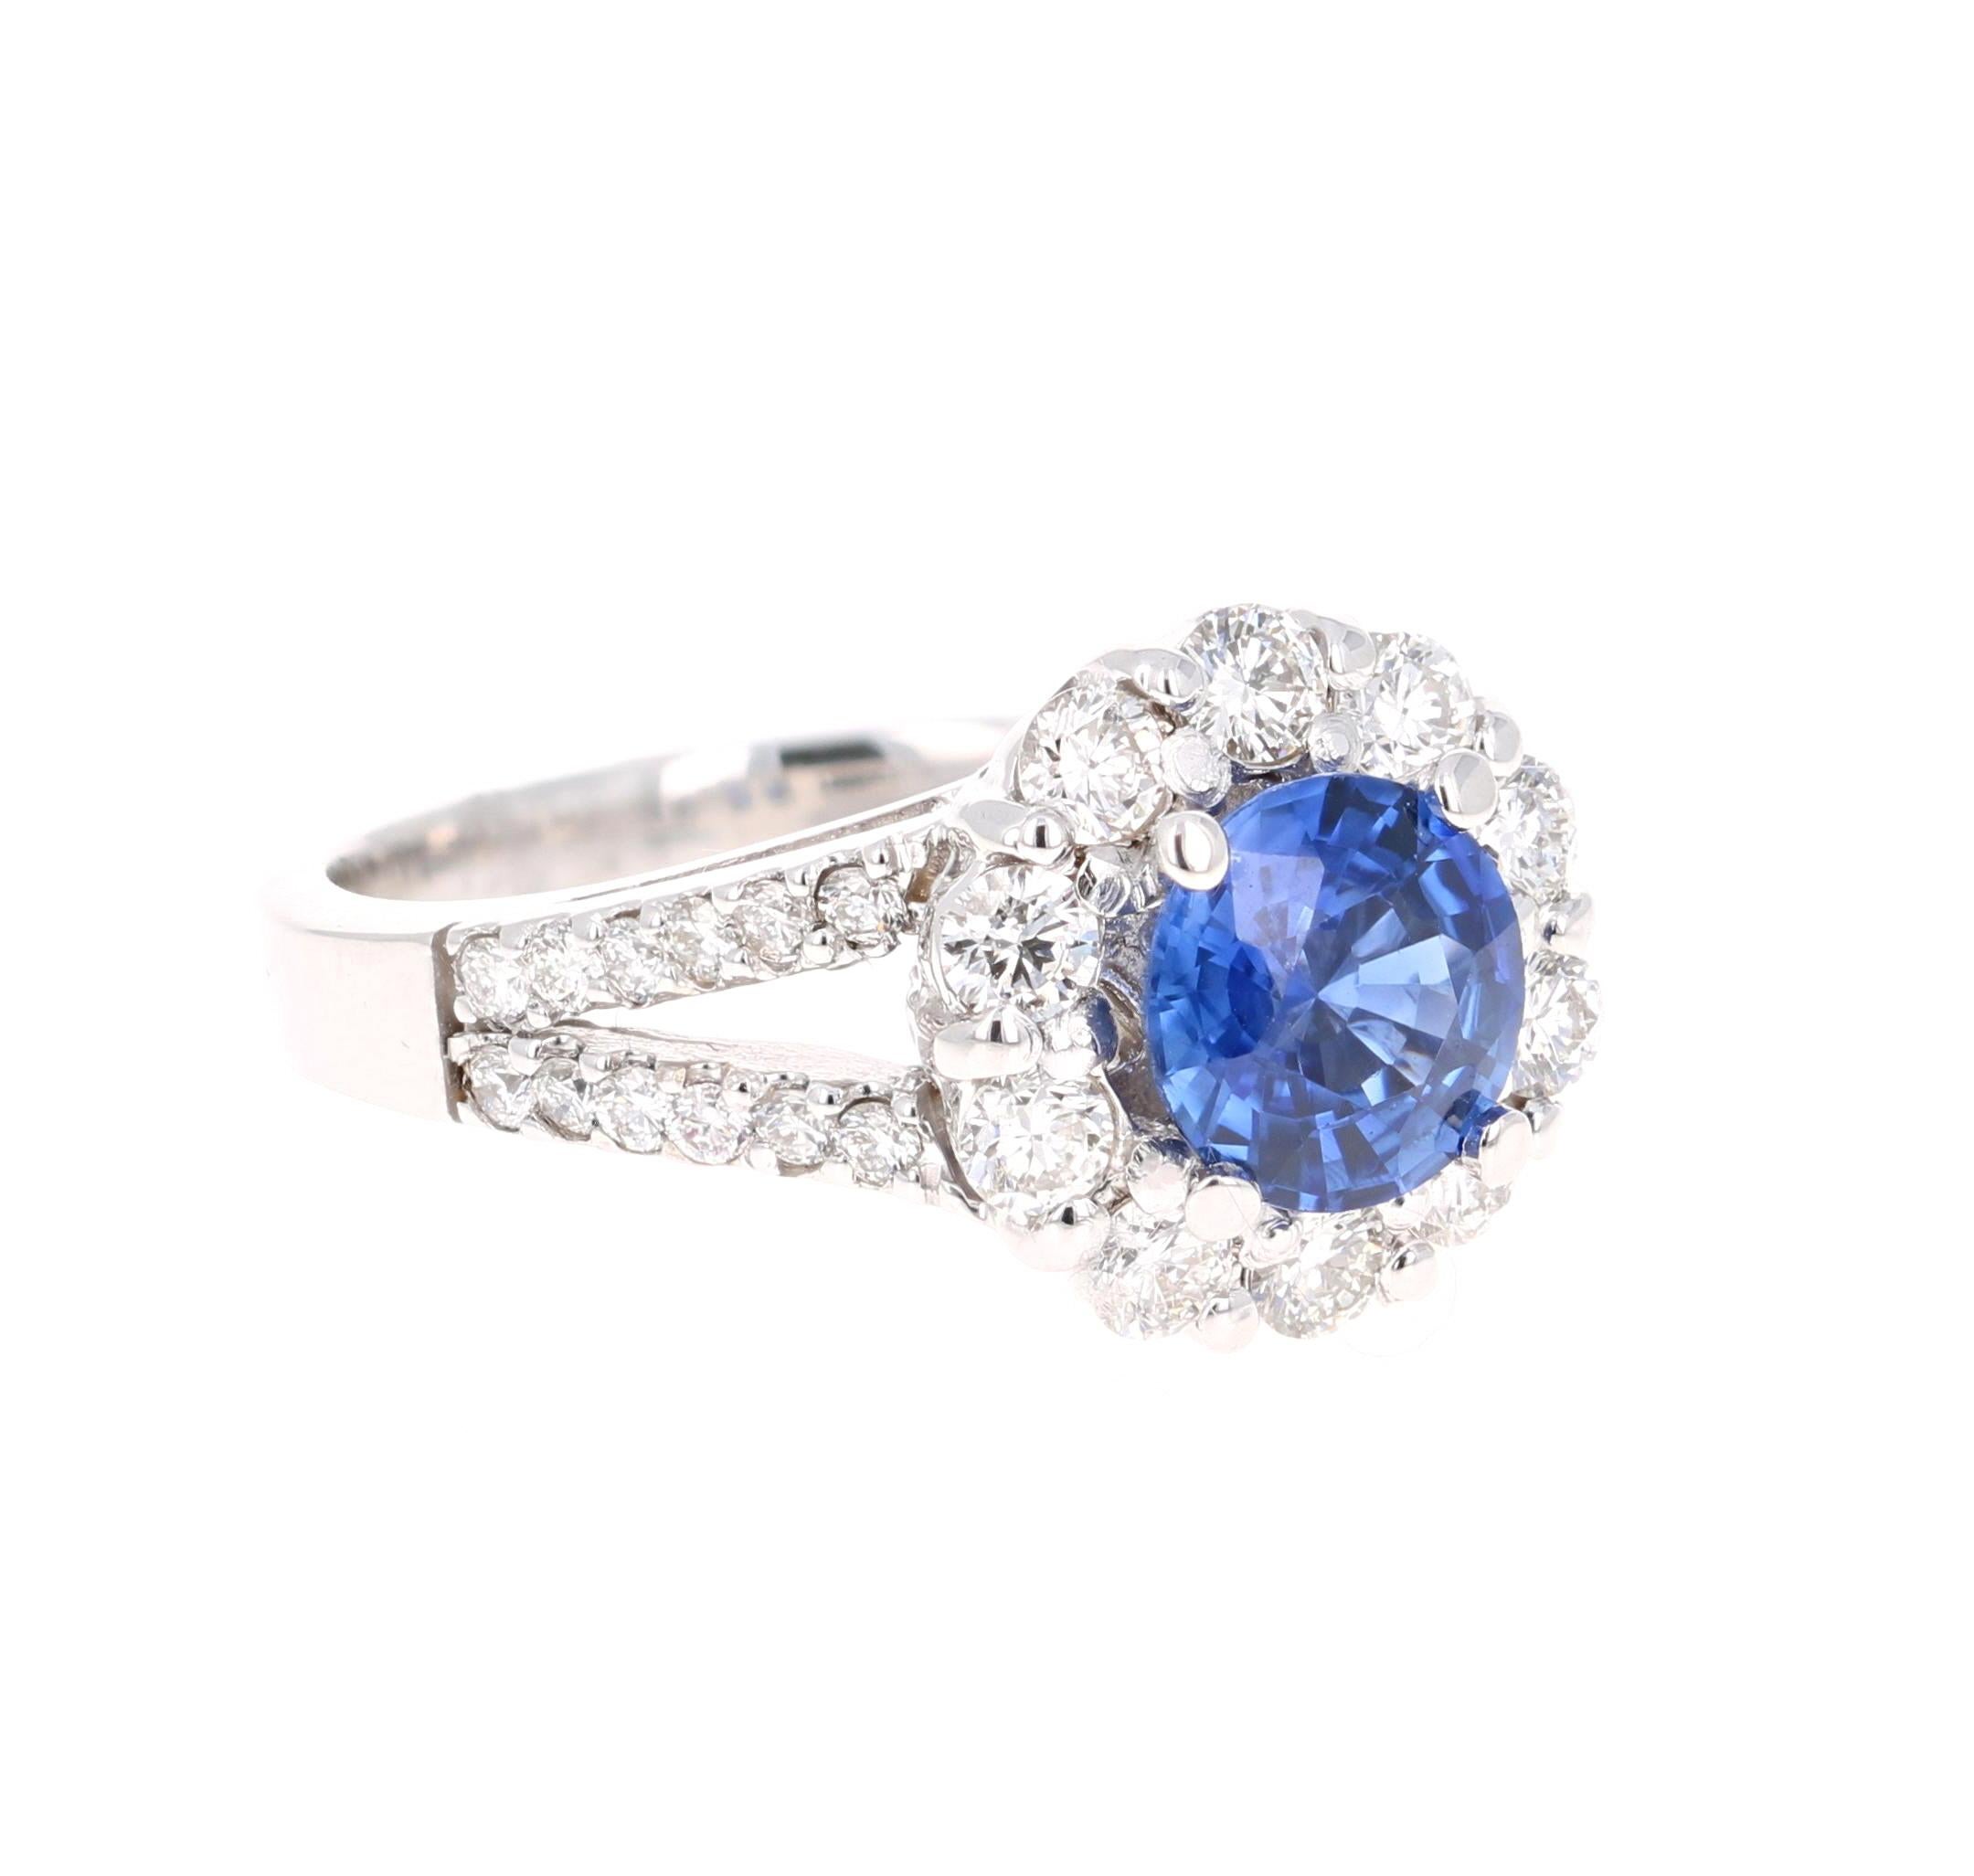 Gorgeous and stunning GIA Certified Sapphire and Diamond Ring - truly a one of a kind piece designed by our in house talented designer!! 

This ring has a Round Cut GIA Certified Blue Sapphire that weighs 1.46 carats set in the center of the ring.